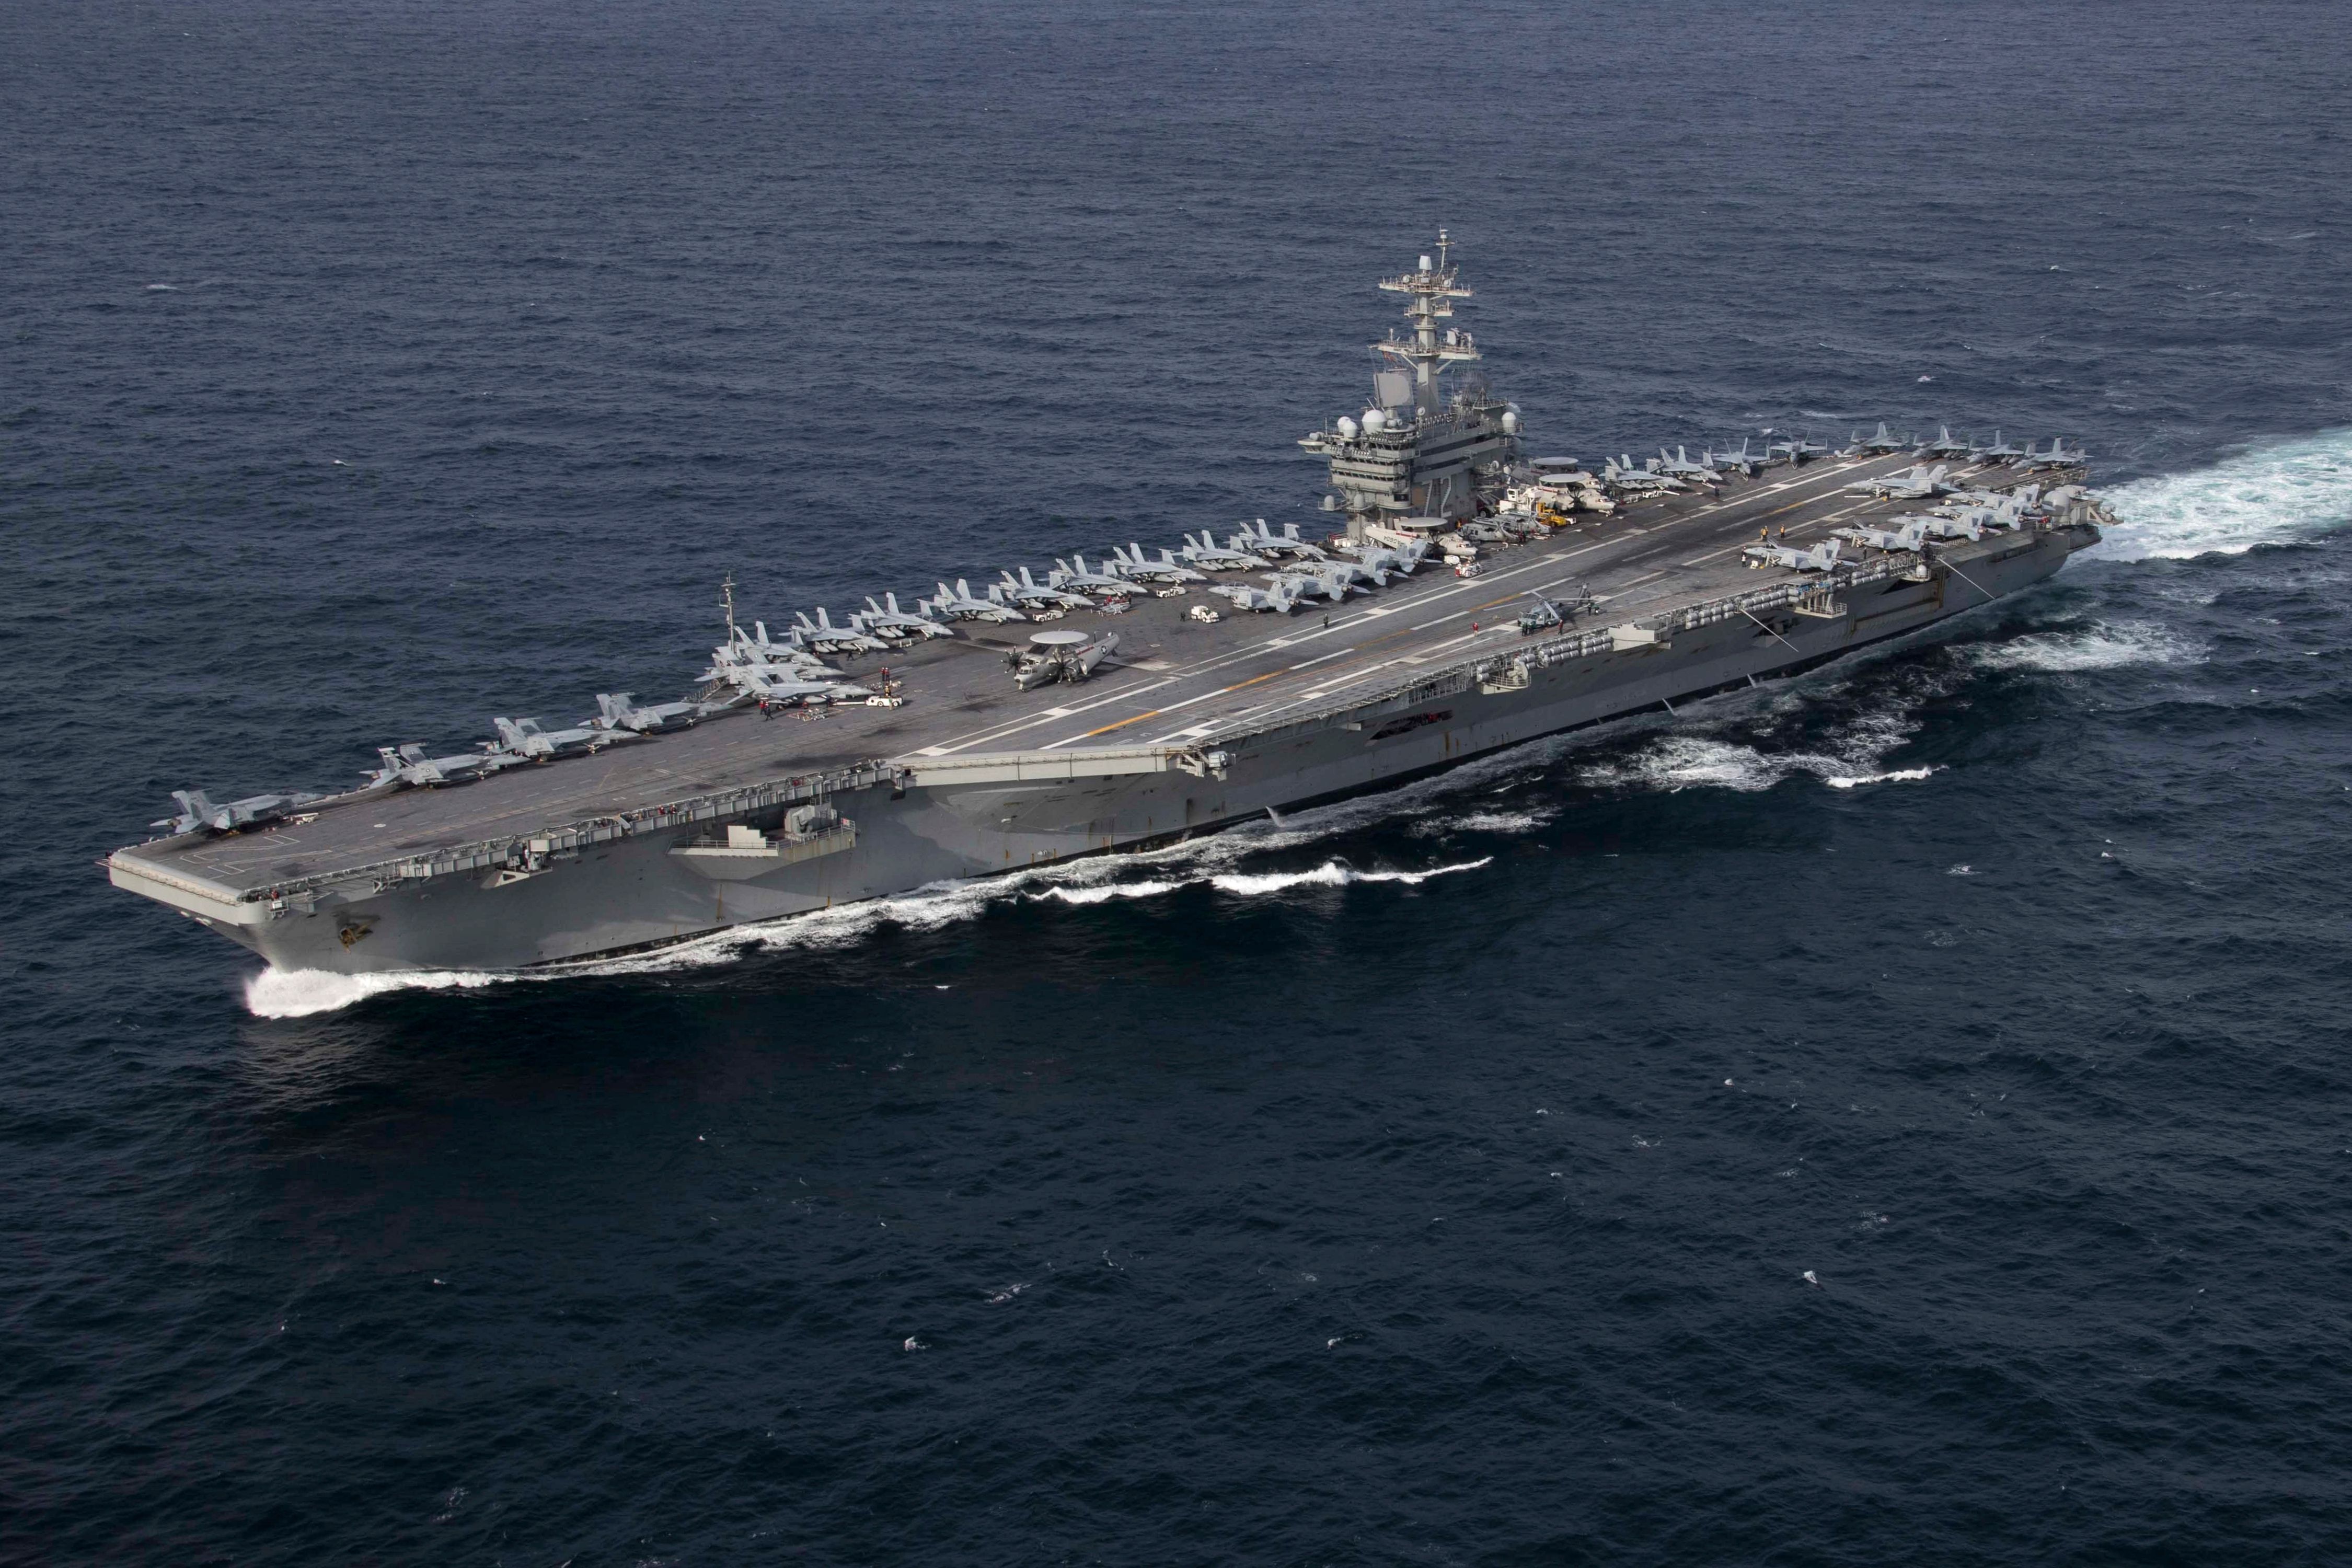 The USS Abraham Lincoln floating in water with many fighter jets on the deck.